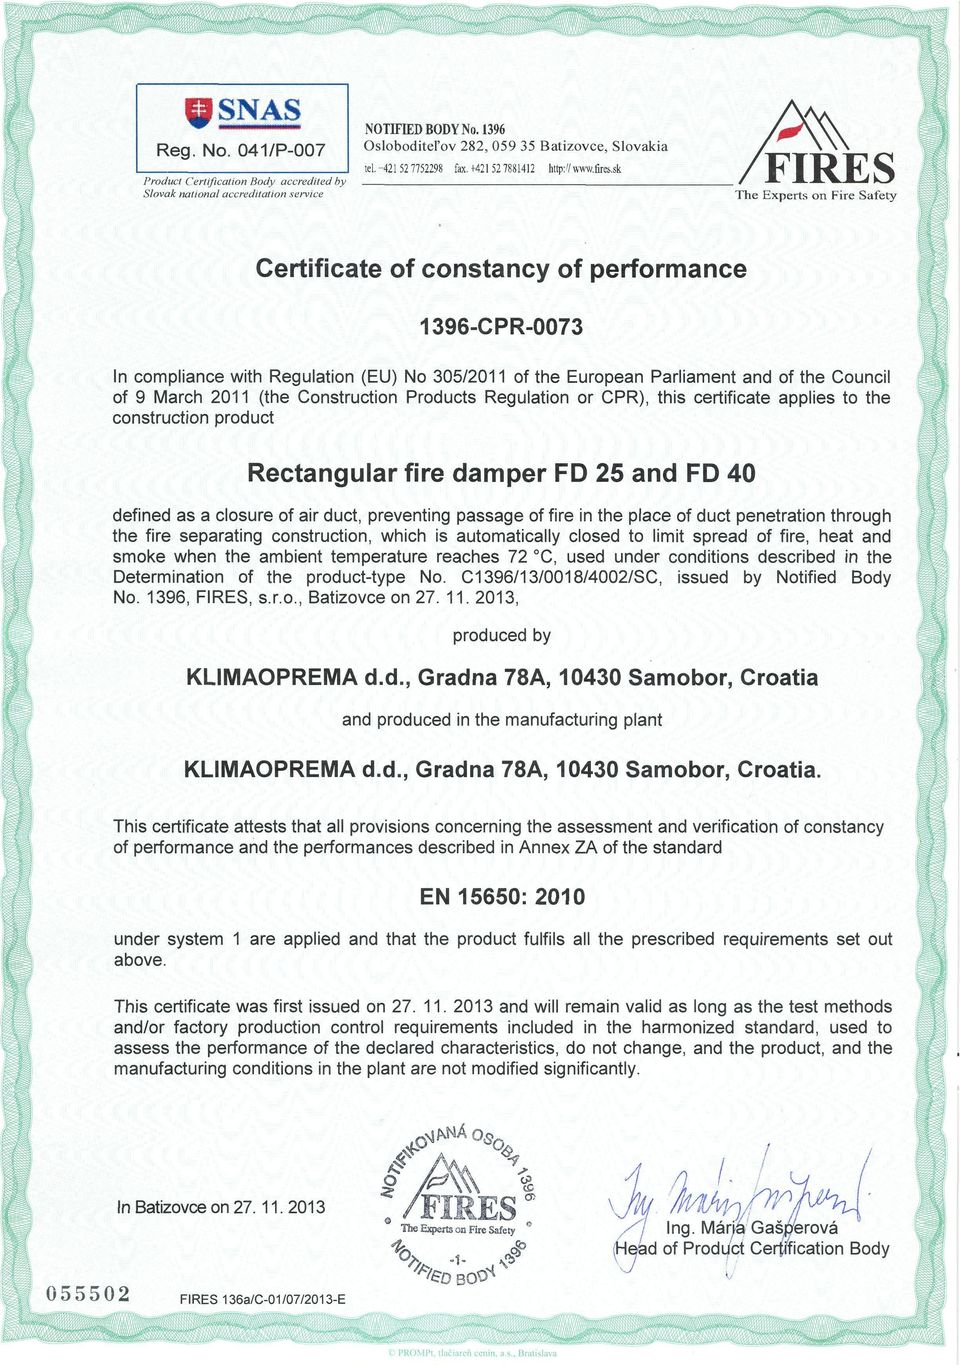 041/P-007 L-- -----' Product Certification Body accredited by Slovak national accreditation service _lel_, -4_21_52_77_52_298_fax_, +_42_152_78_81_412_hltp_:_'/w_,vw_,fir_e'_,sk #nm FIRE S \ \ \ The